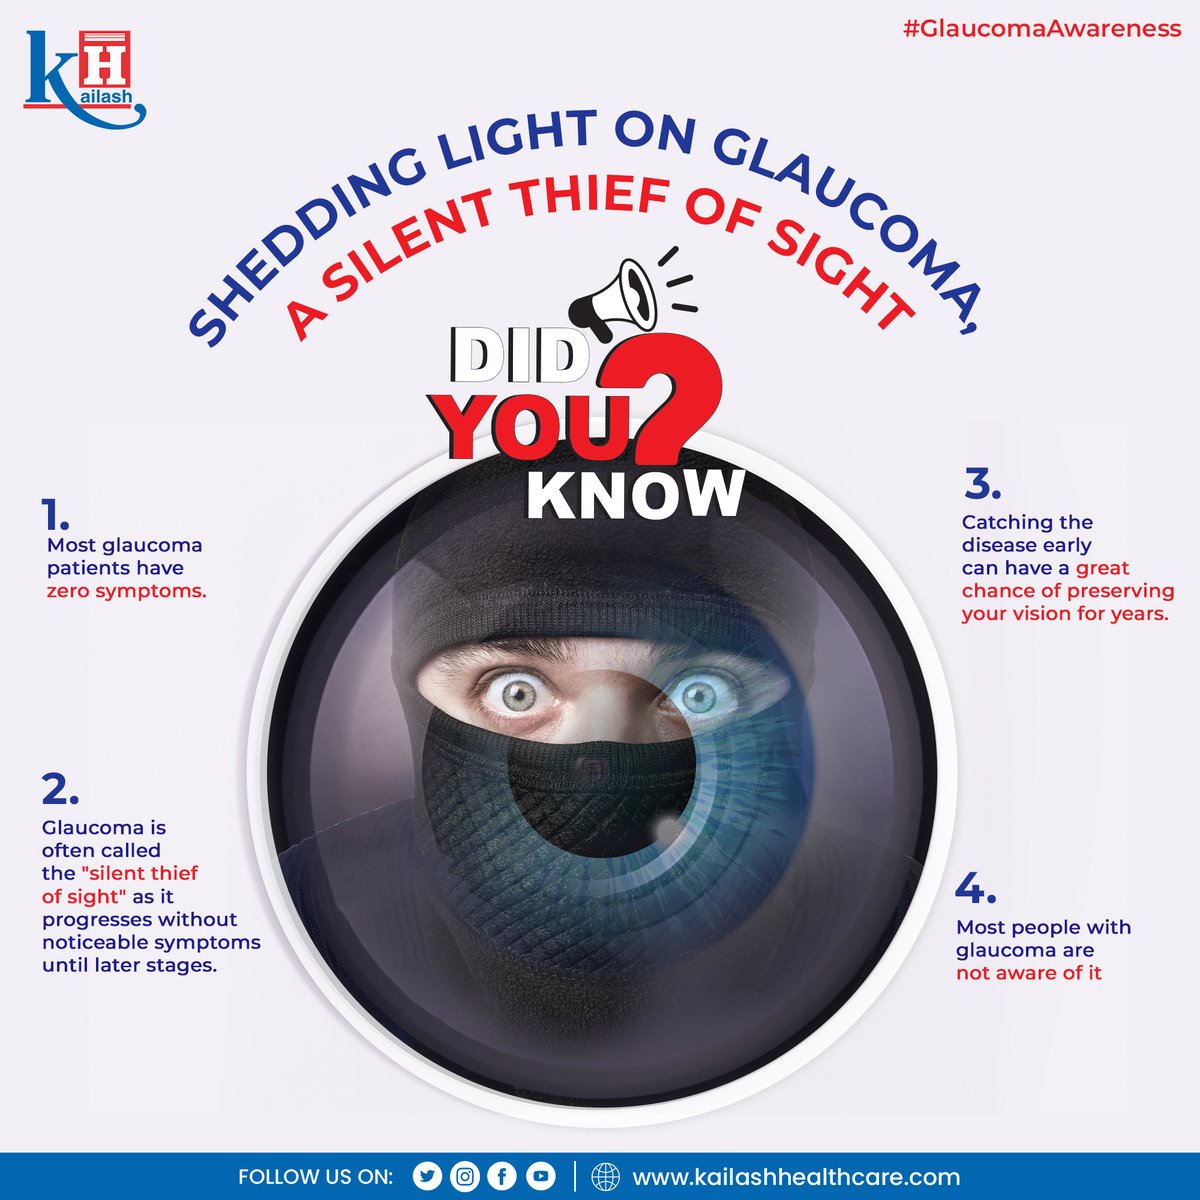 #DidYouKnow ?

Glaucoma, a common eye disease, can affect your vision adversely causing blindness. Early detection is crucial!
Get your eyes checked regularly.

Consult our Eye Specialists: kailashhealthcare.com

#sehatonfriday #SaveYourSight #eyecare #vision #eyecheckup…